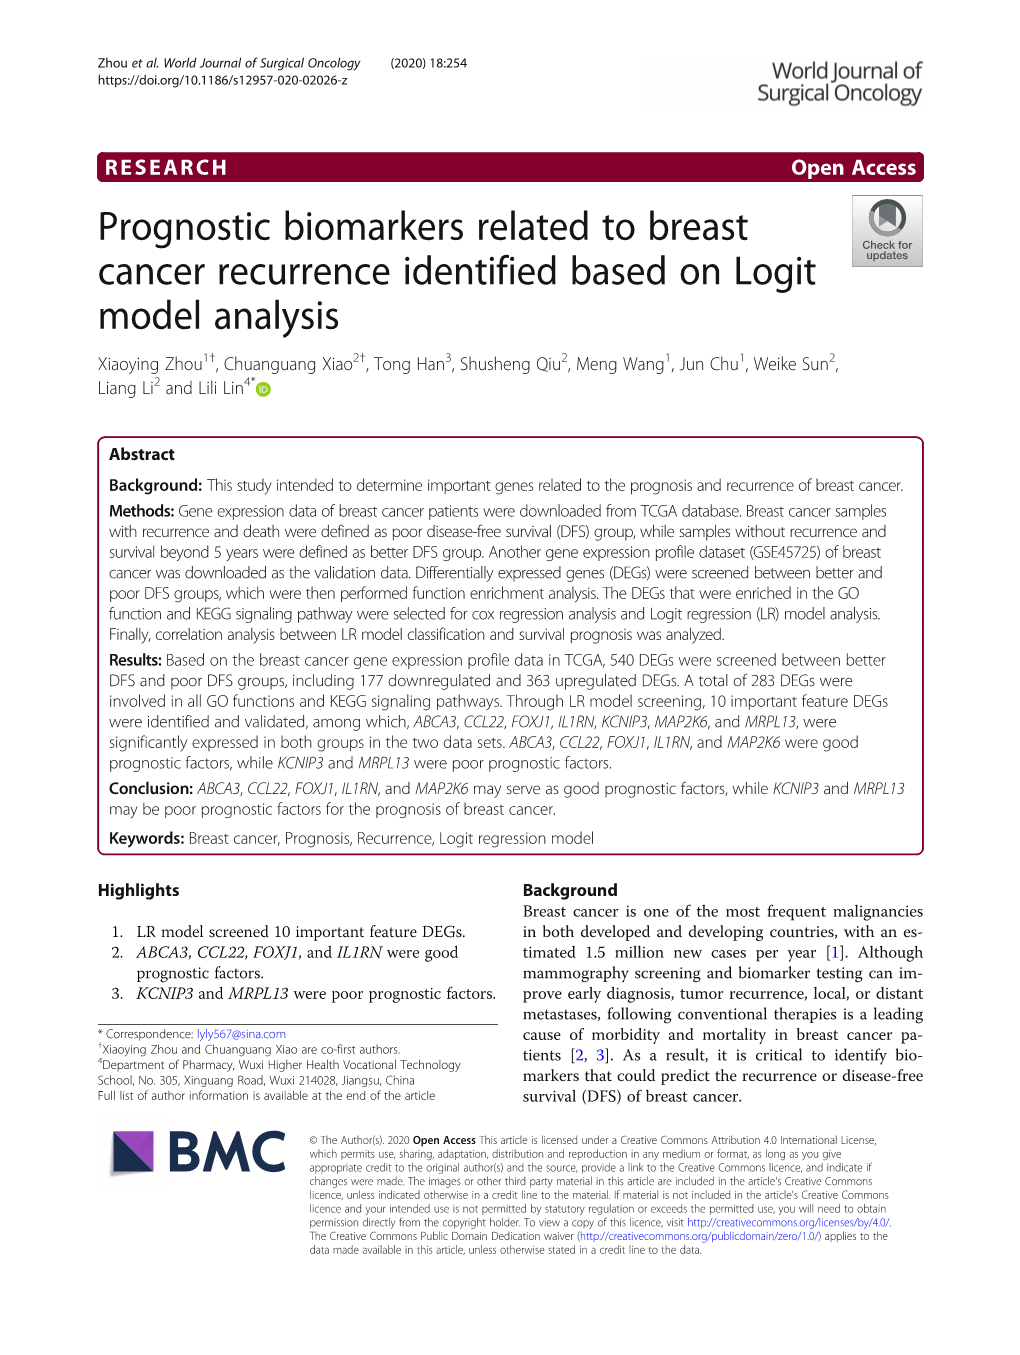 Prognostic Biomarkers Related to Breast Cancer Recurrence Identified